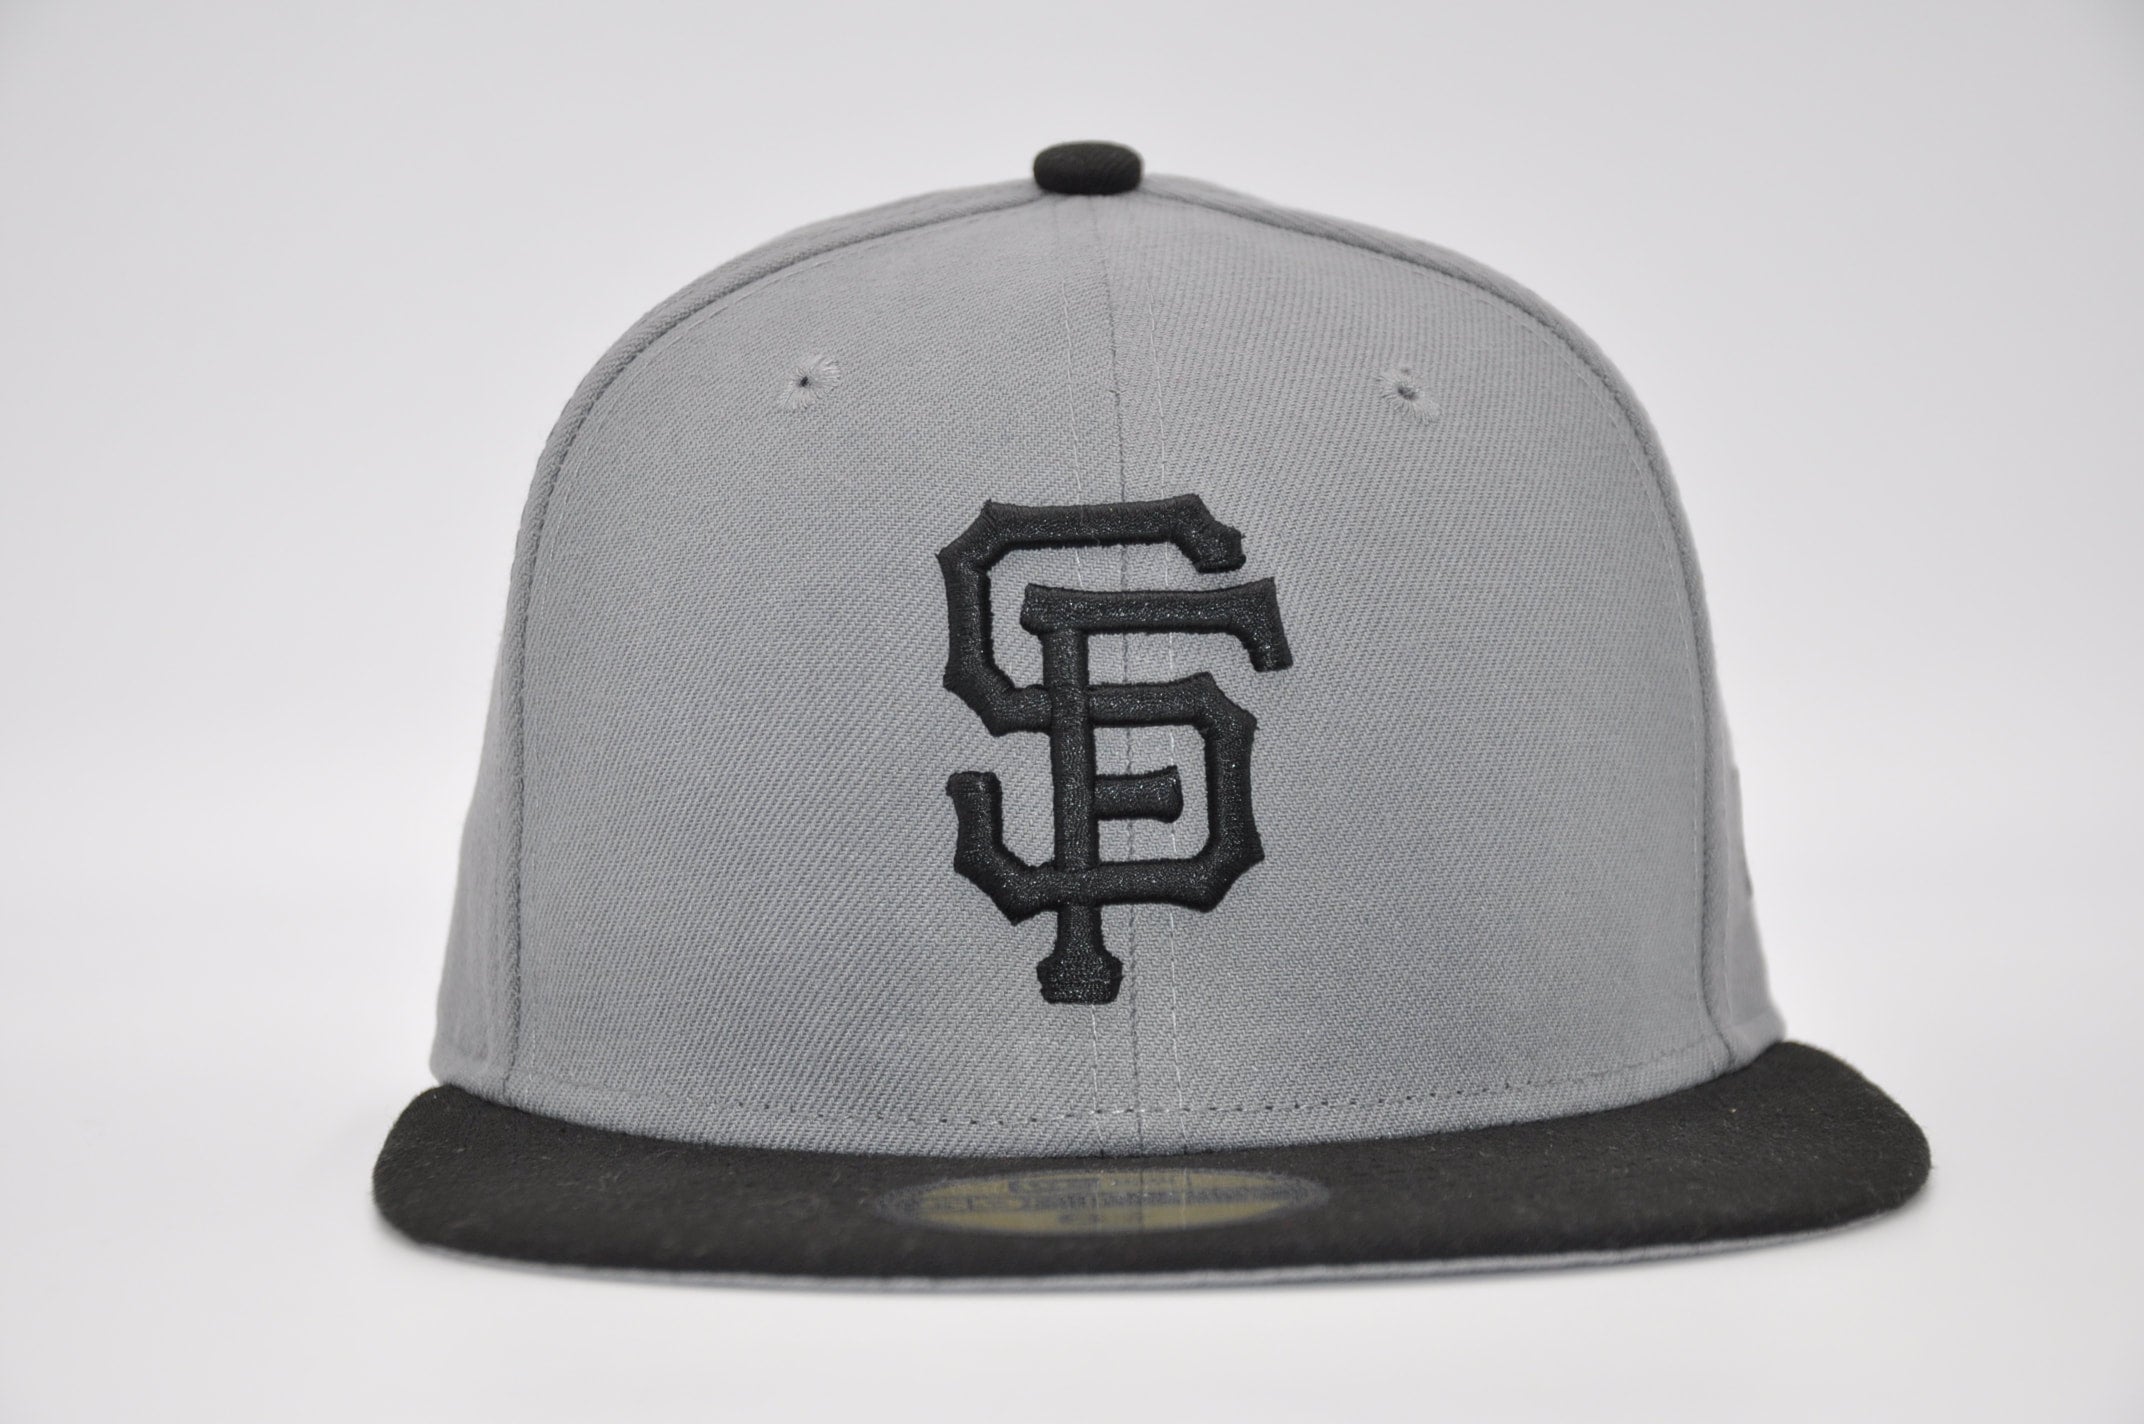 San Francisco Giants New Era State 59FIFTY Fitted Hat - White/Black